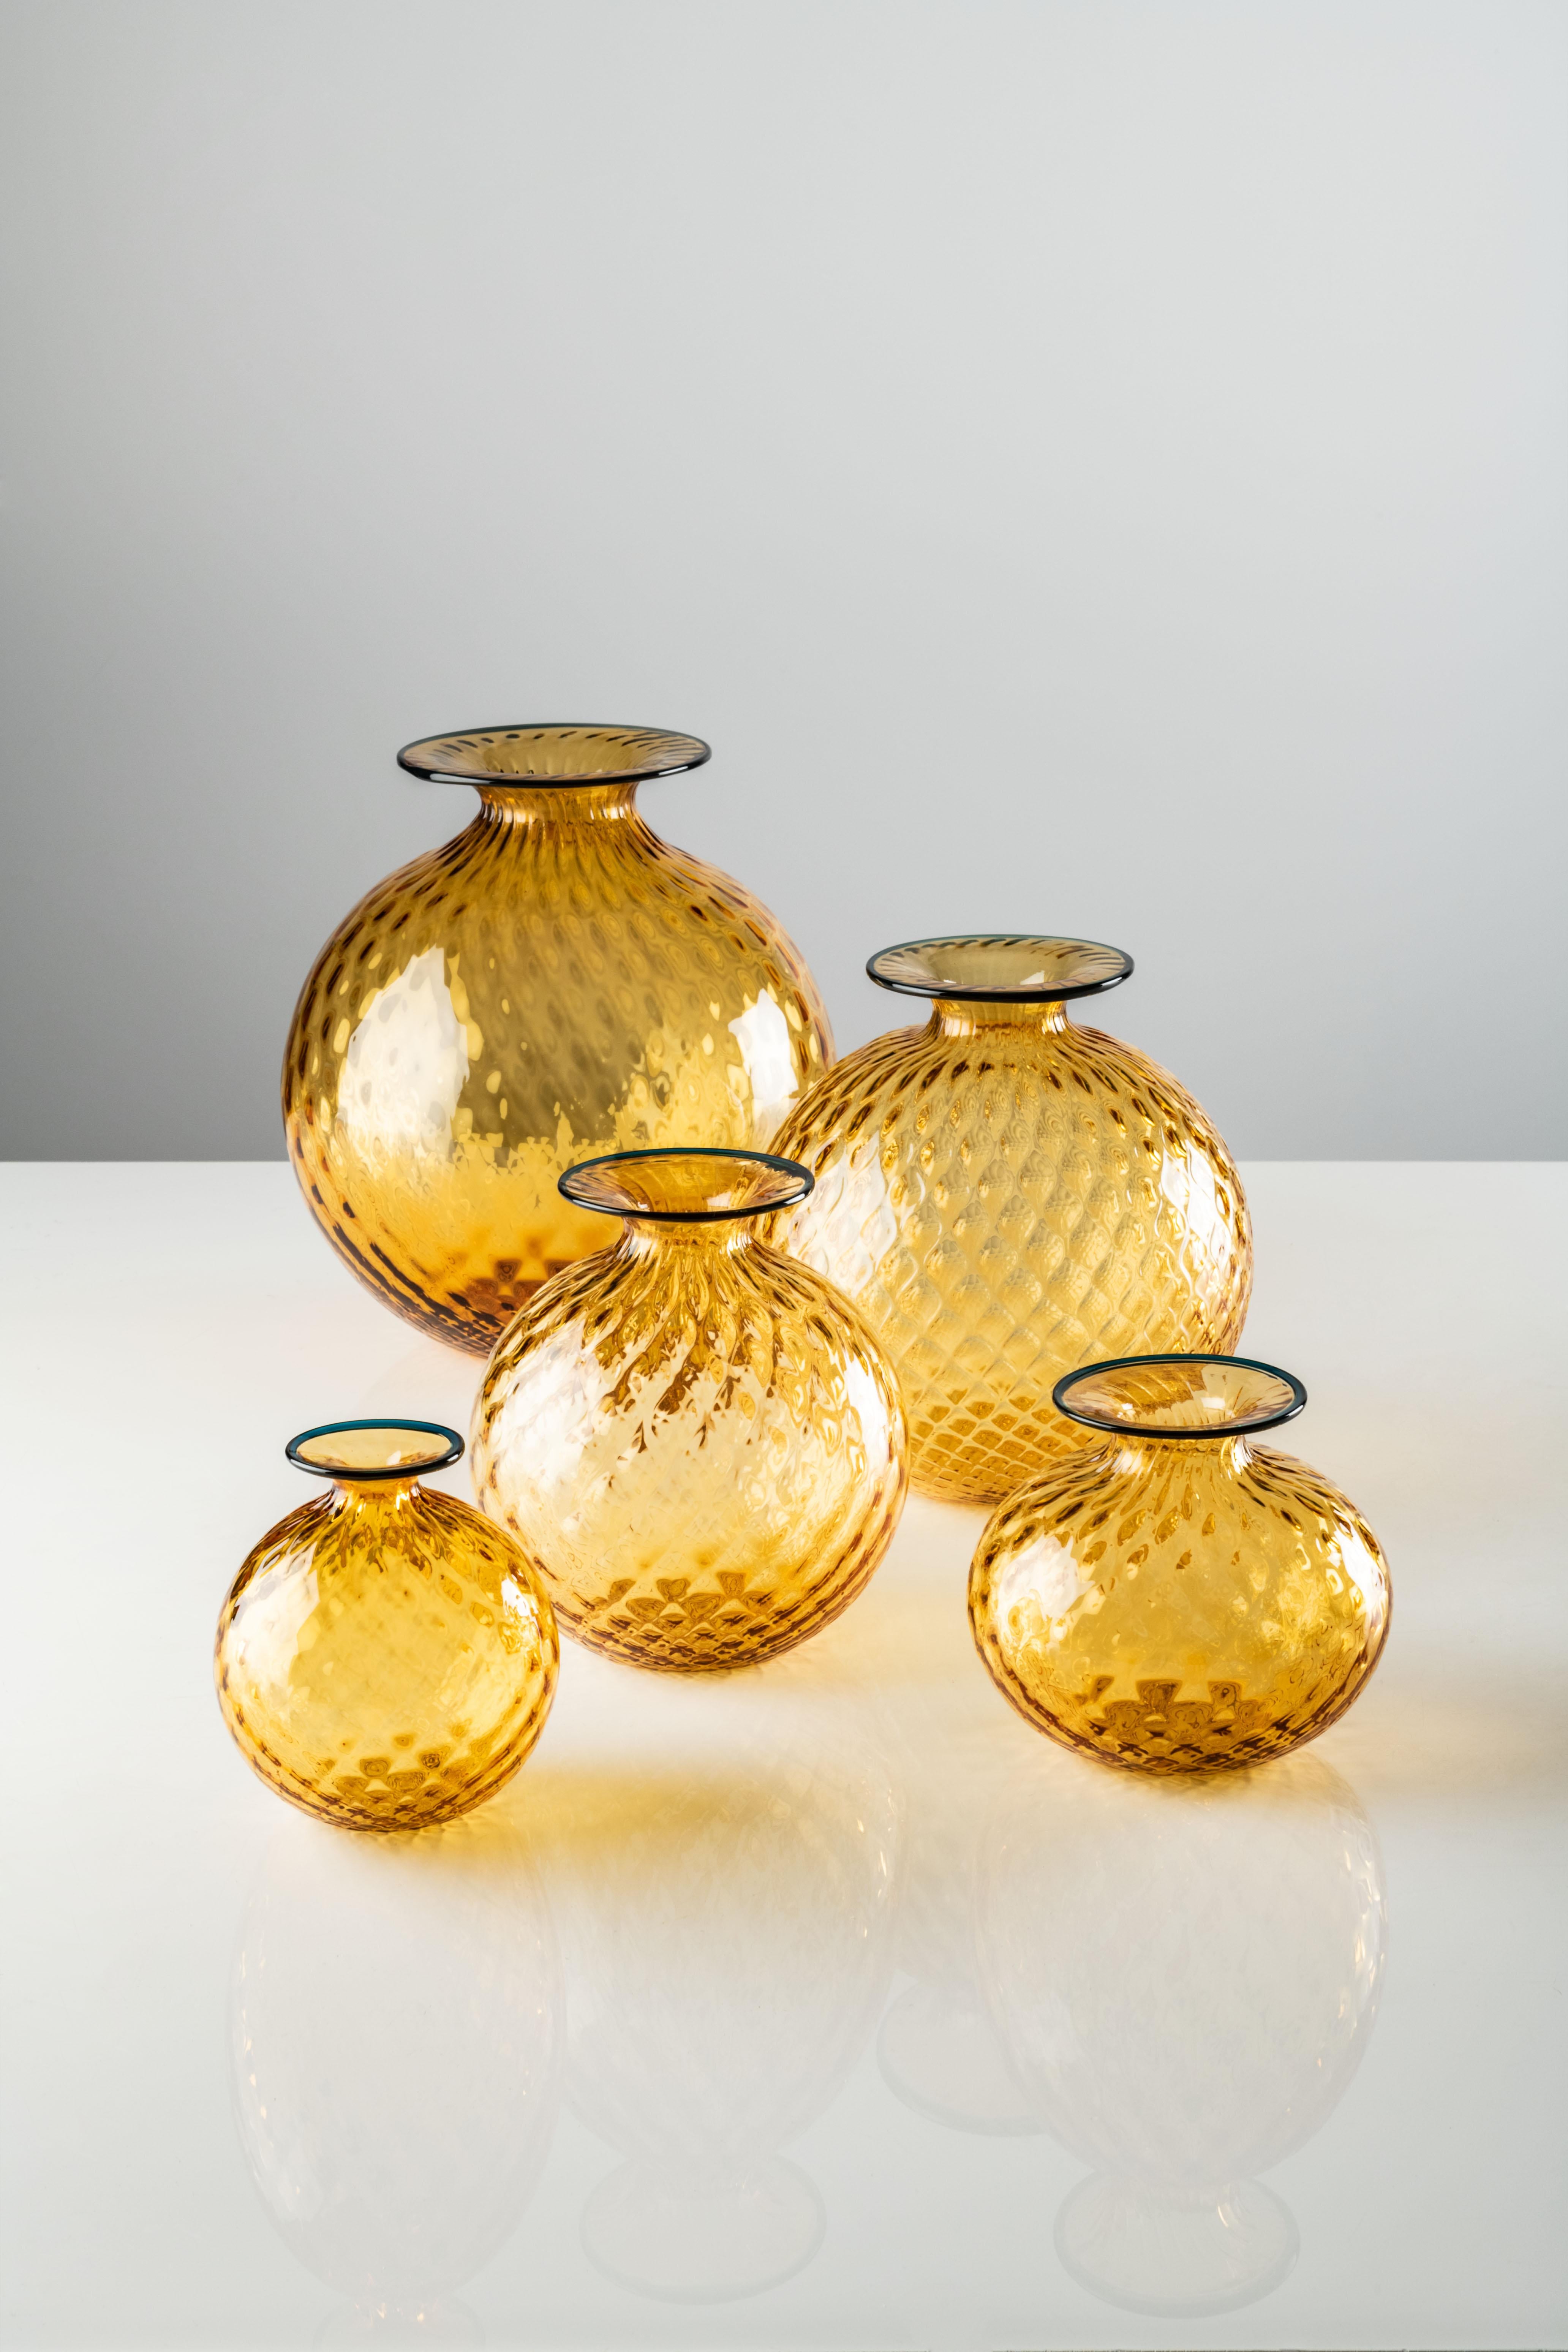 Monofiore Balloton Large Vase in Amber Murano Glass by Venini. It looks soft, but it’s not; it’s glass. The optical illusion of Monofiori by Venini from 1970 lies in its name: Balloton, a special technique that lends a unique matelassé effect to the